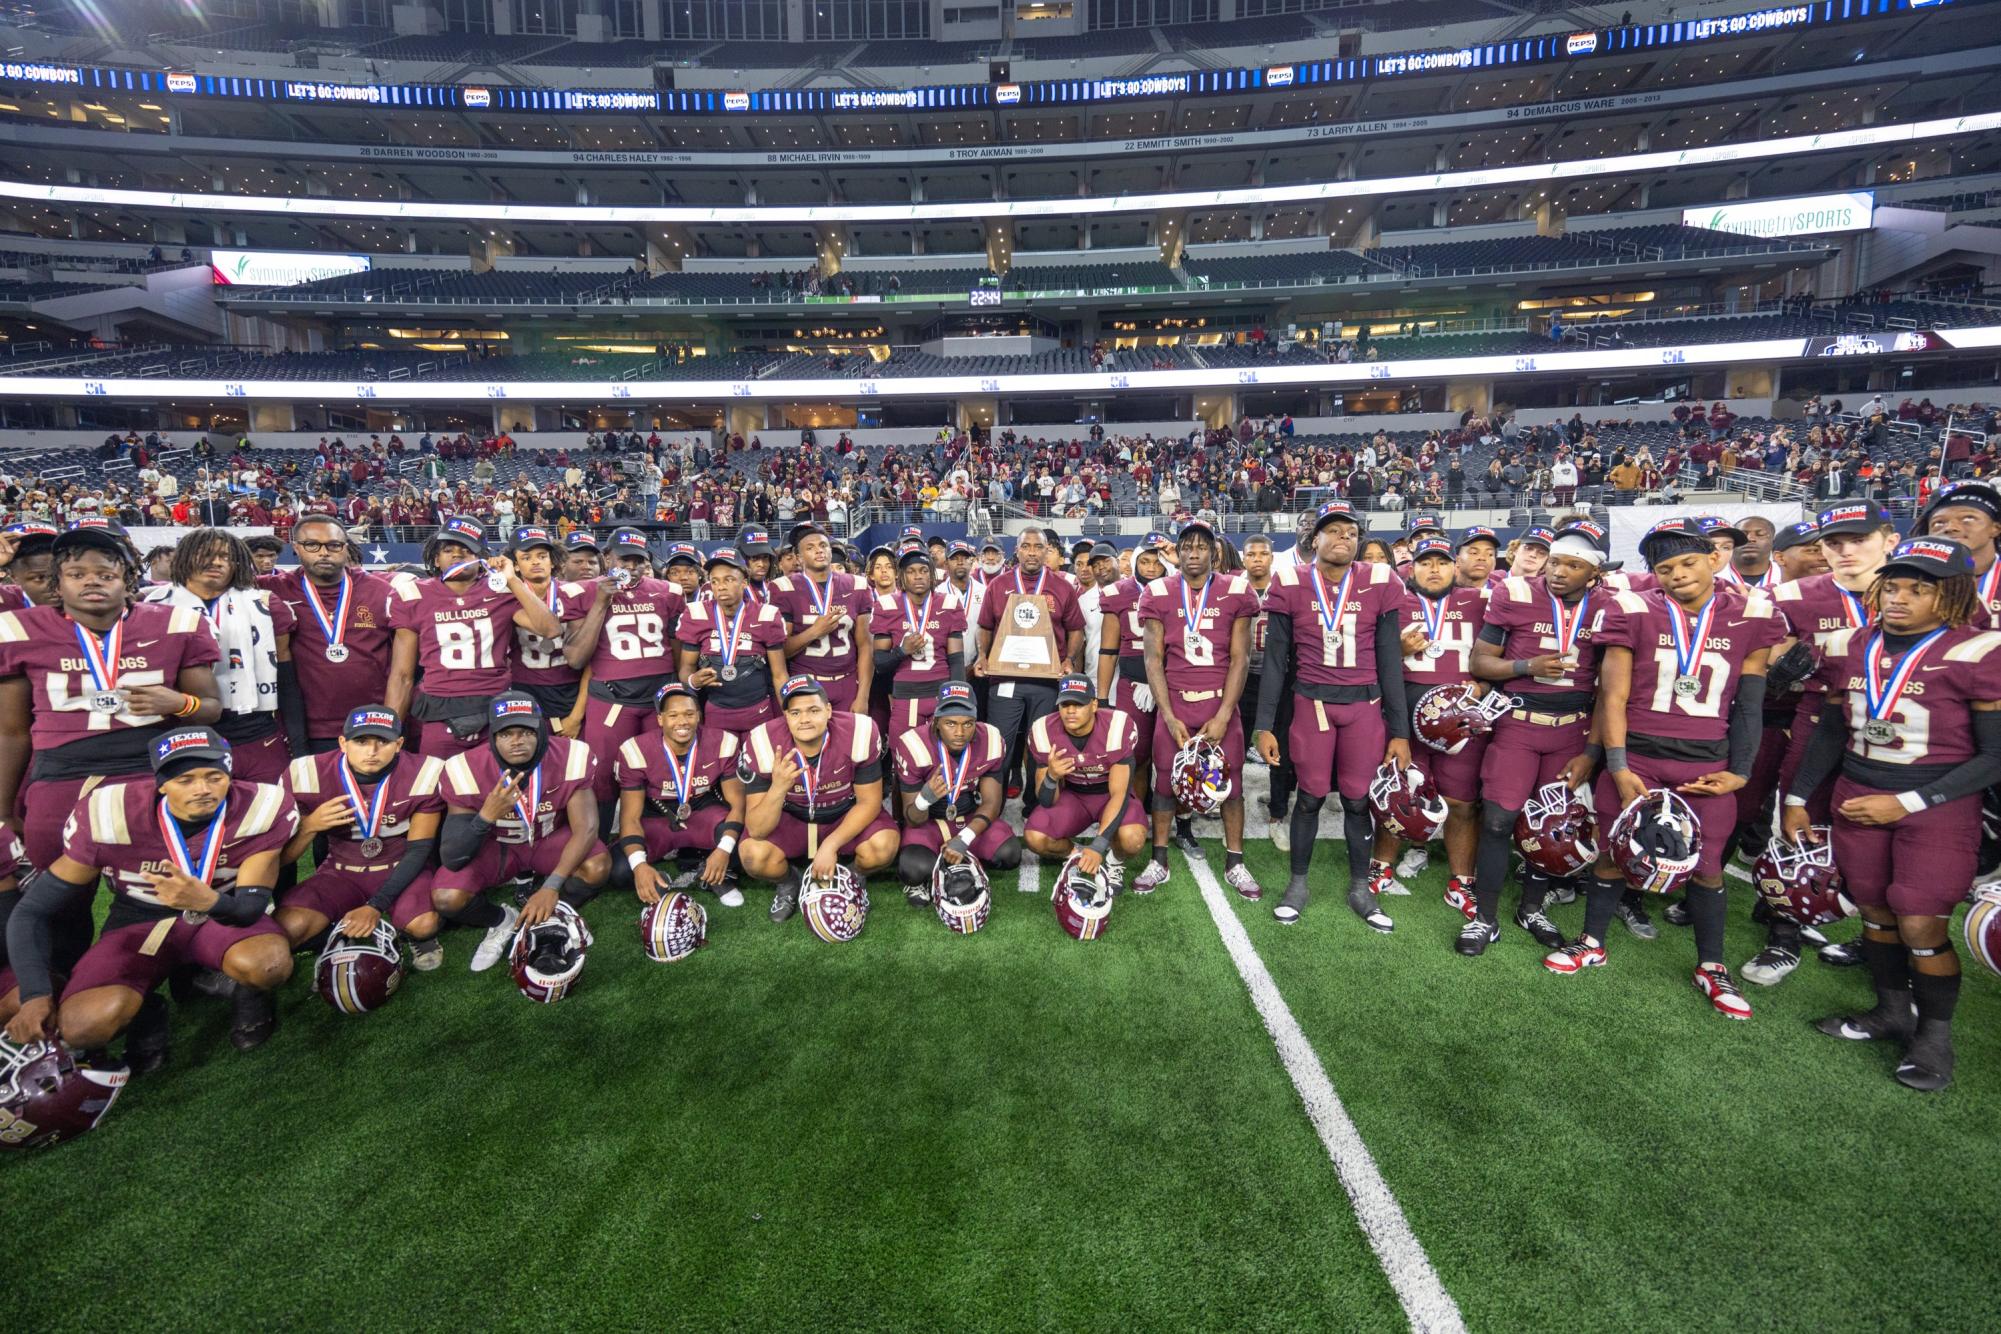 Class 6A - Division II - UIL Texas State Championship - The Summer Creek Bulldogs!